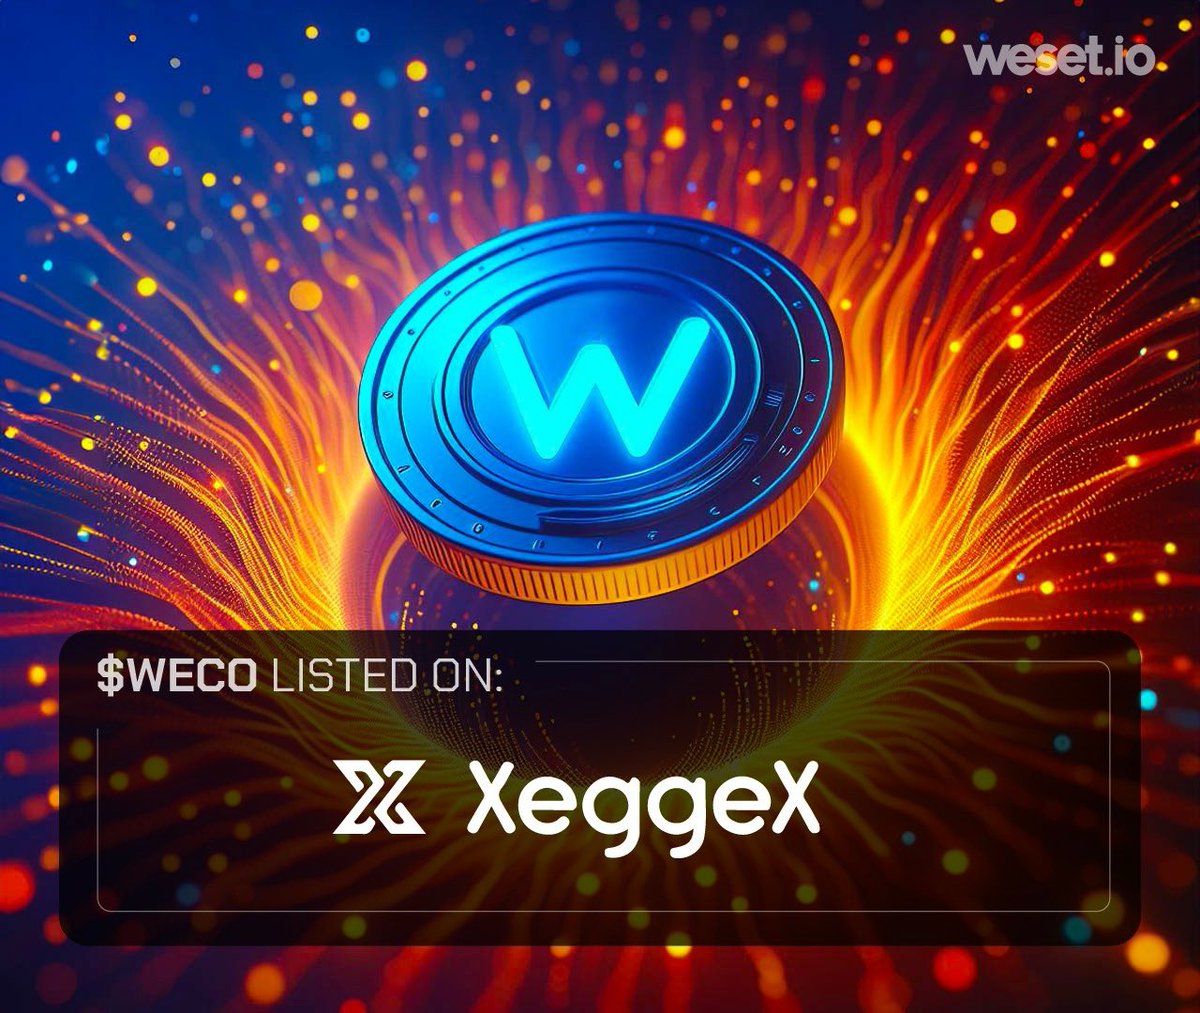 $WECO is just days away from listing on @xeggex. 

$WECO is the utility token of the #Weset ecosystem, an #RWA platform and marketplace with a variety of collections already trading. 

#CryptoNews #CEXListing #CentralizedExchange #NewListingAlert #LowCapGems #MicroCapGems